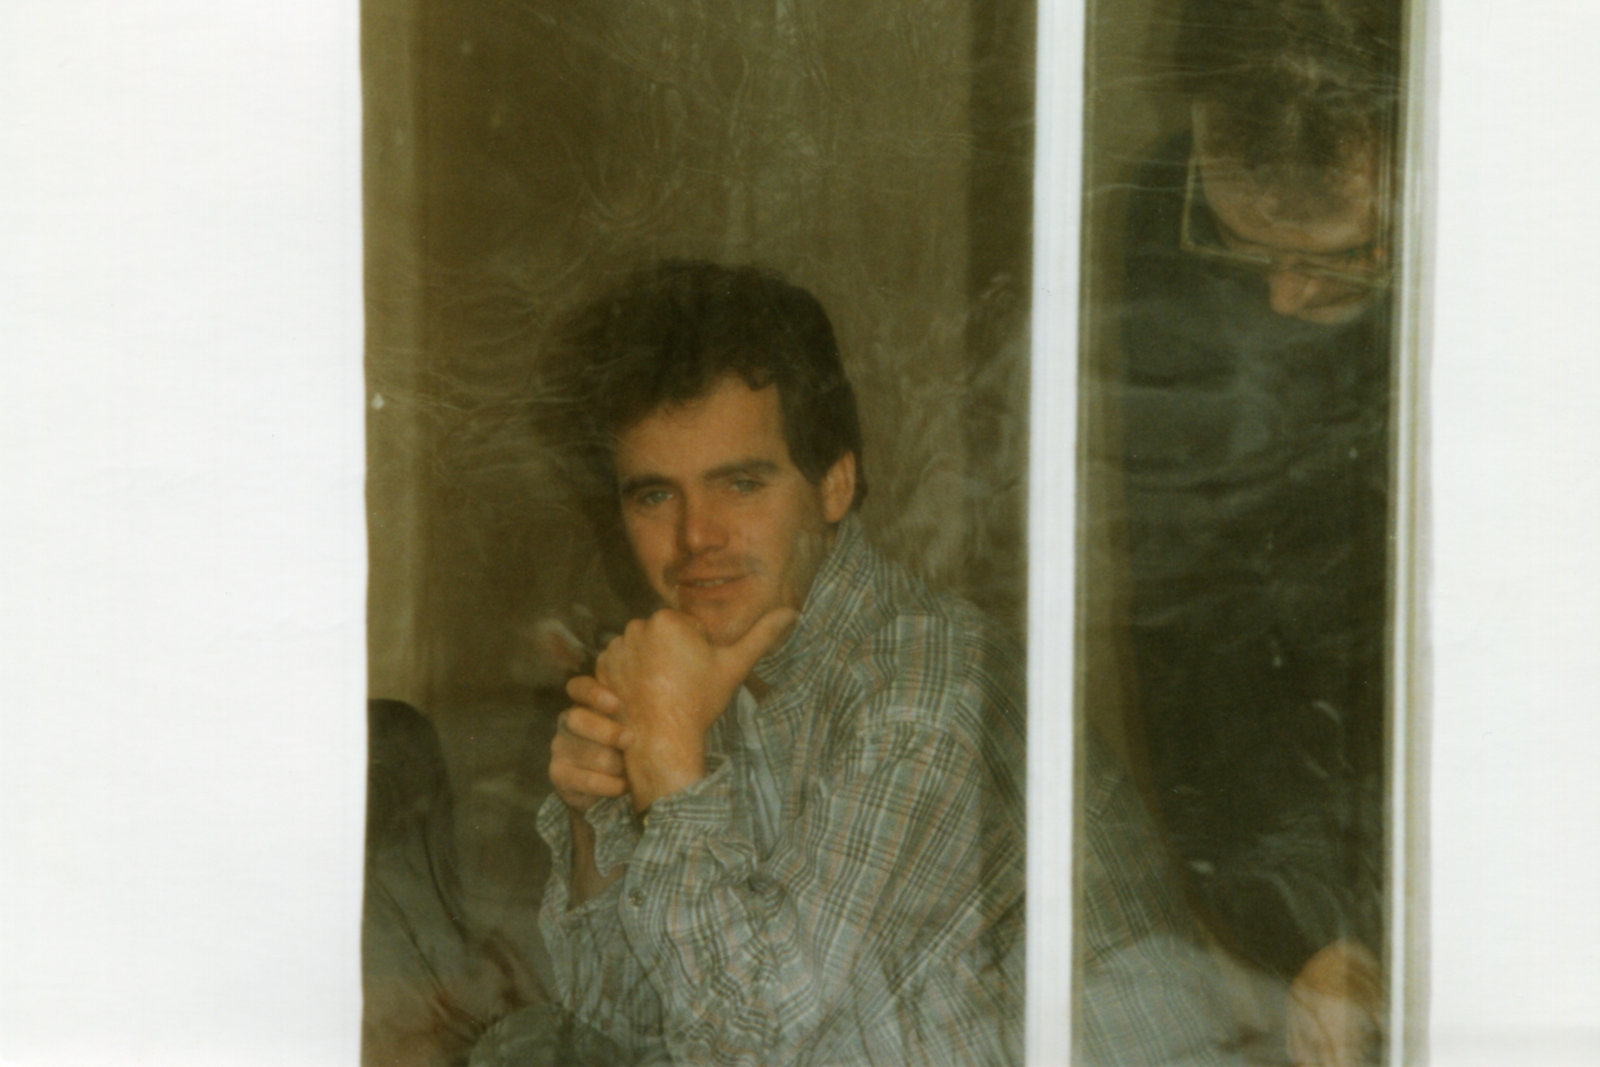 Photo with The Seeds of Time lead singer and guitar player Alastair James Thompson looking through the studio window